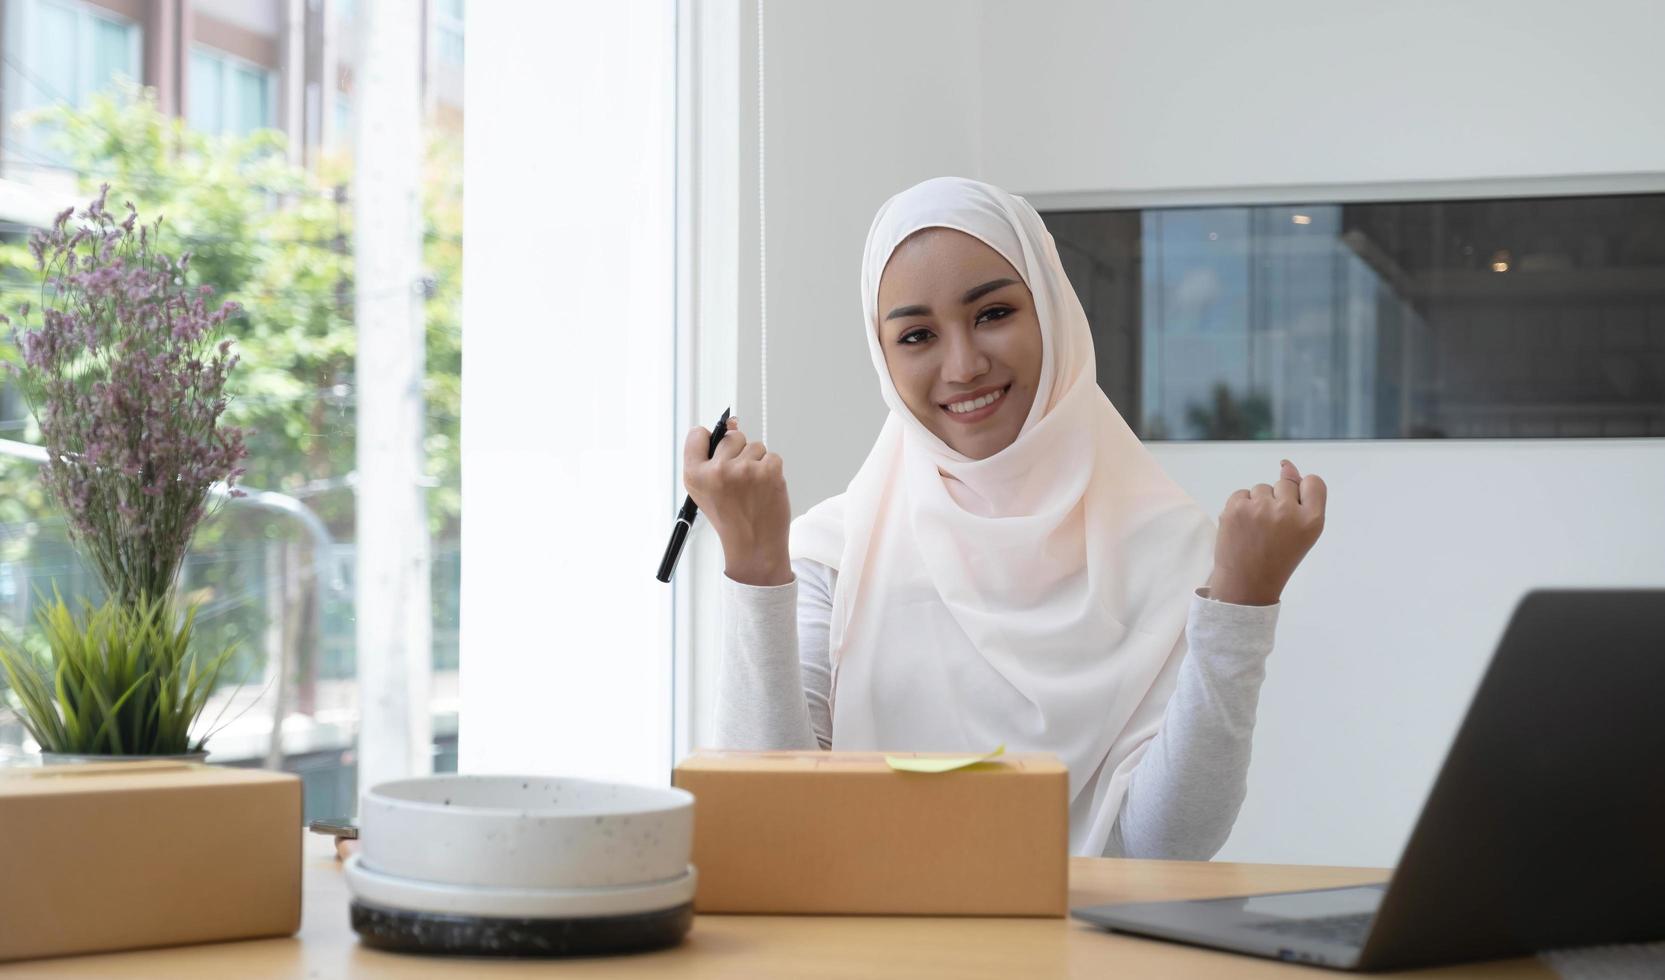 Portrait of a cute smiling Muslim woman wearing a light pink hijab sitting on an office chair. Looking at the camera is delighted while being able to sell online and the background of the box. photo